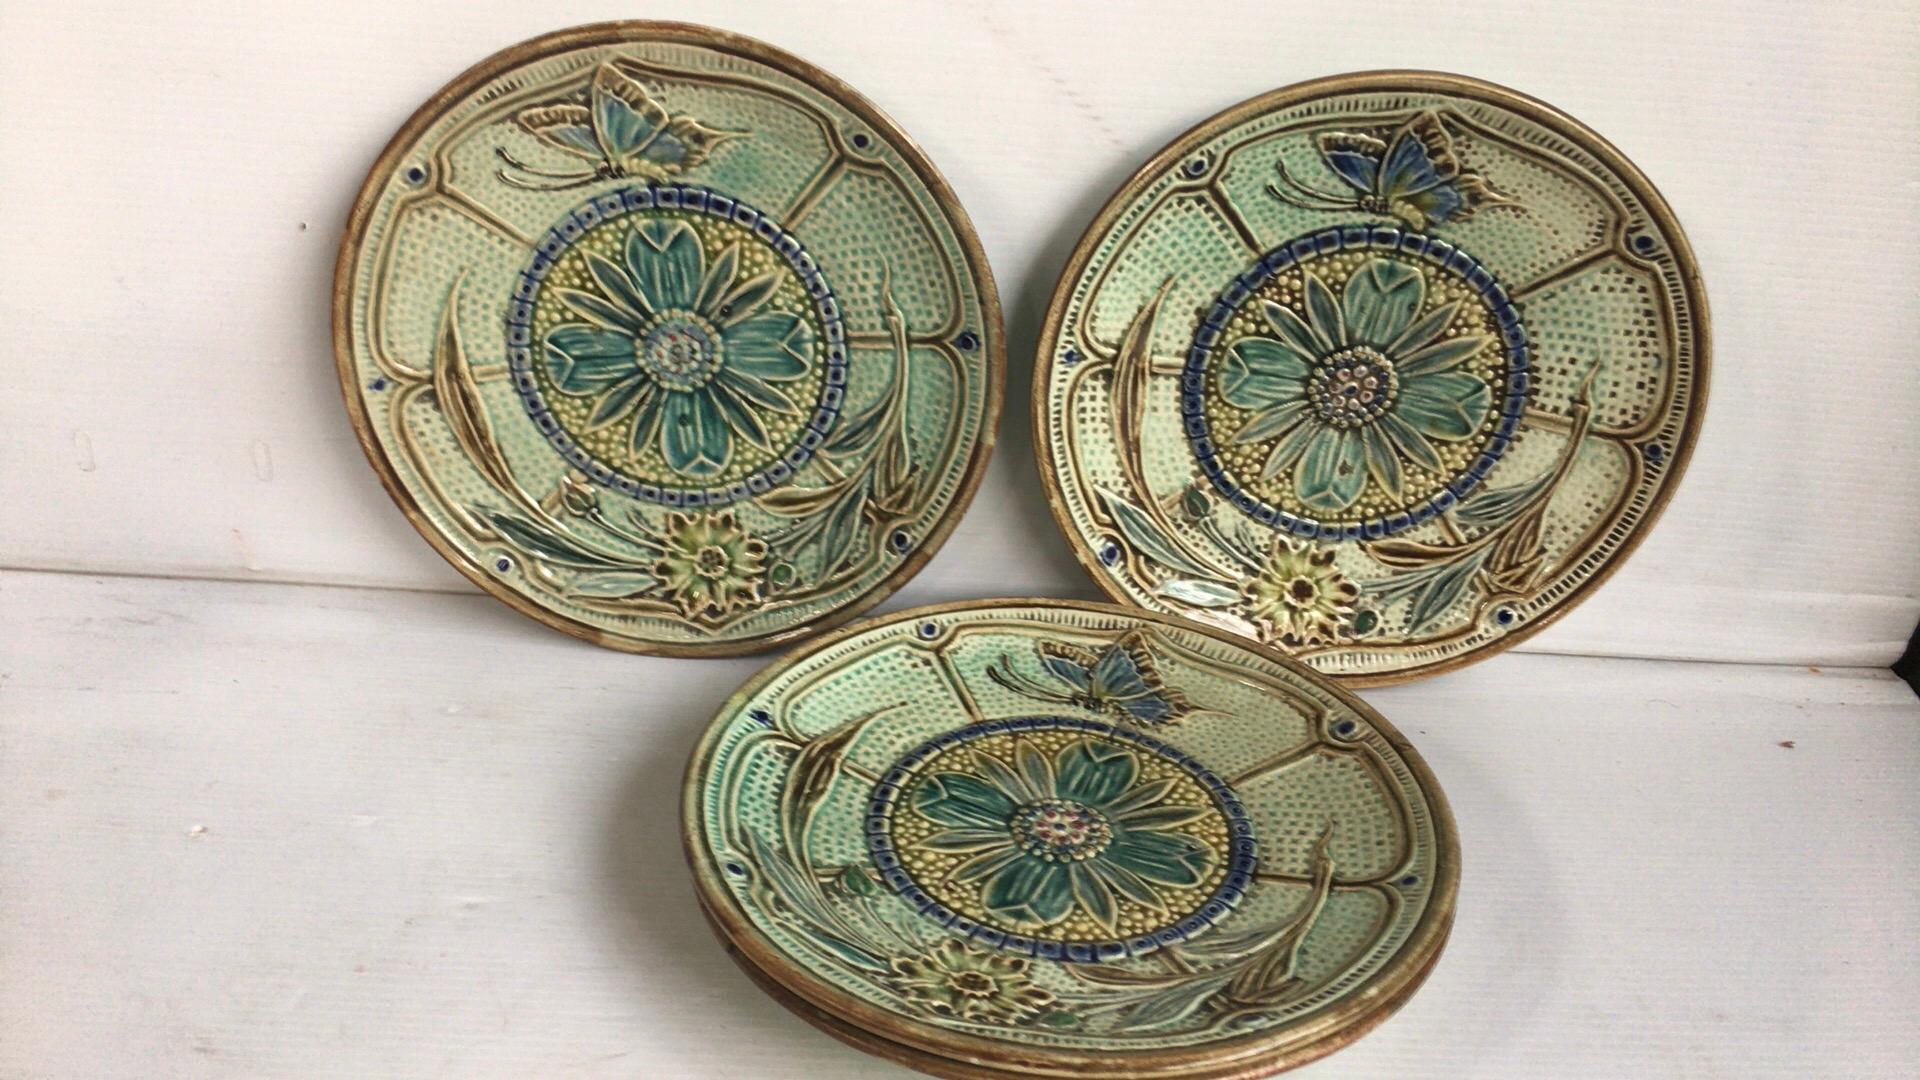 Majolica flowers and butterfly plate Wasmuel, circa 1880.
3 plates available.